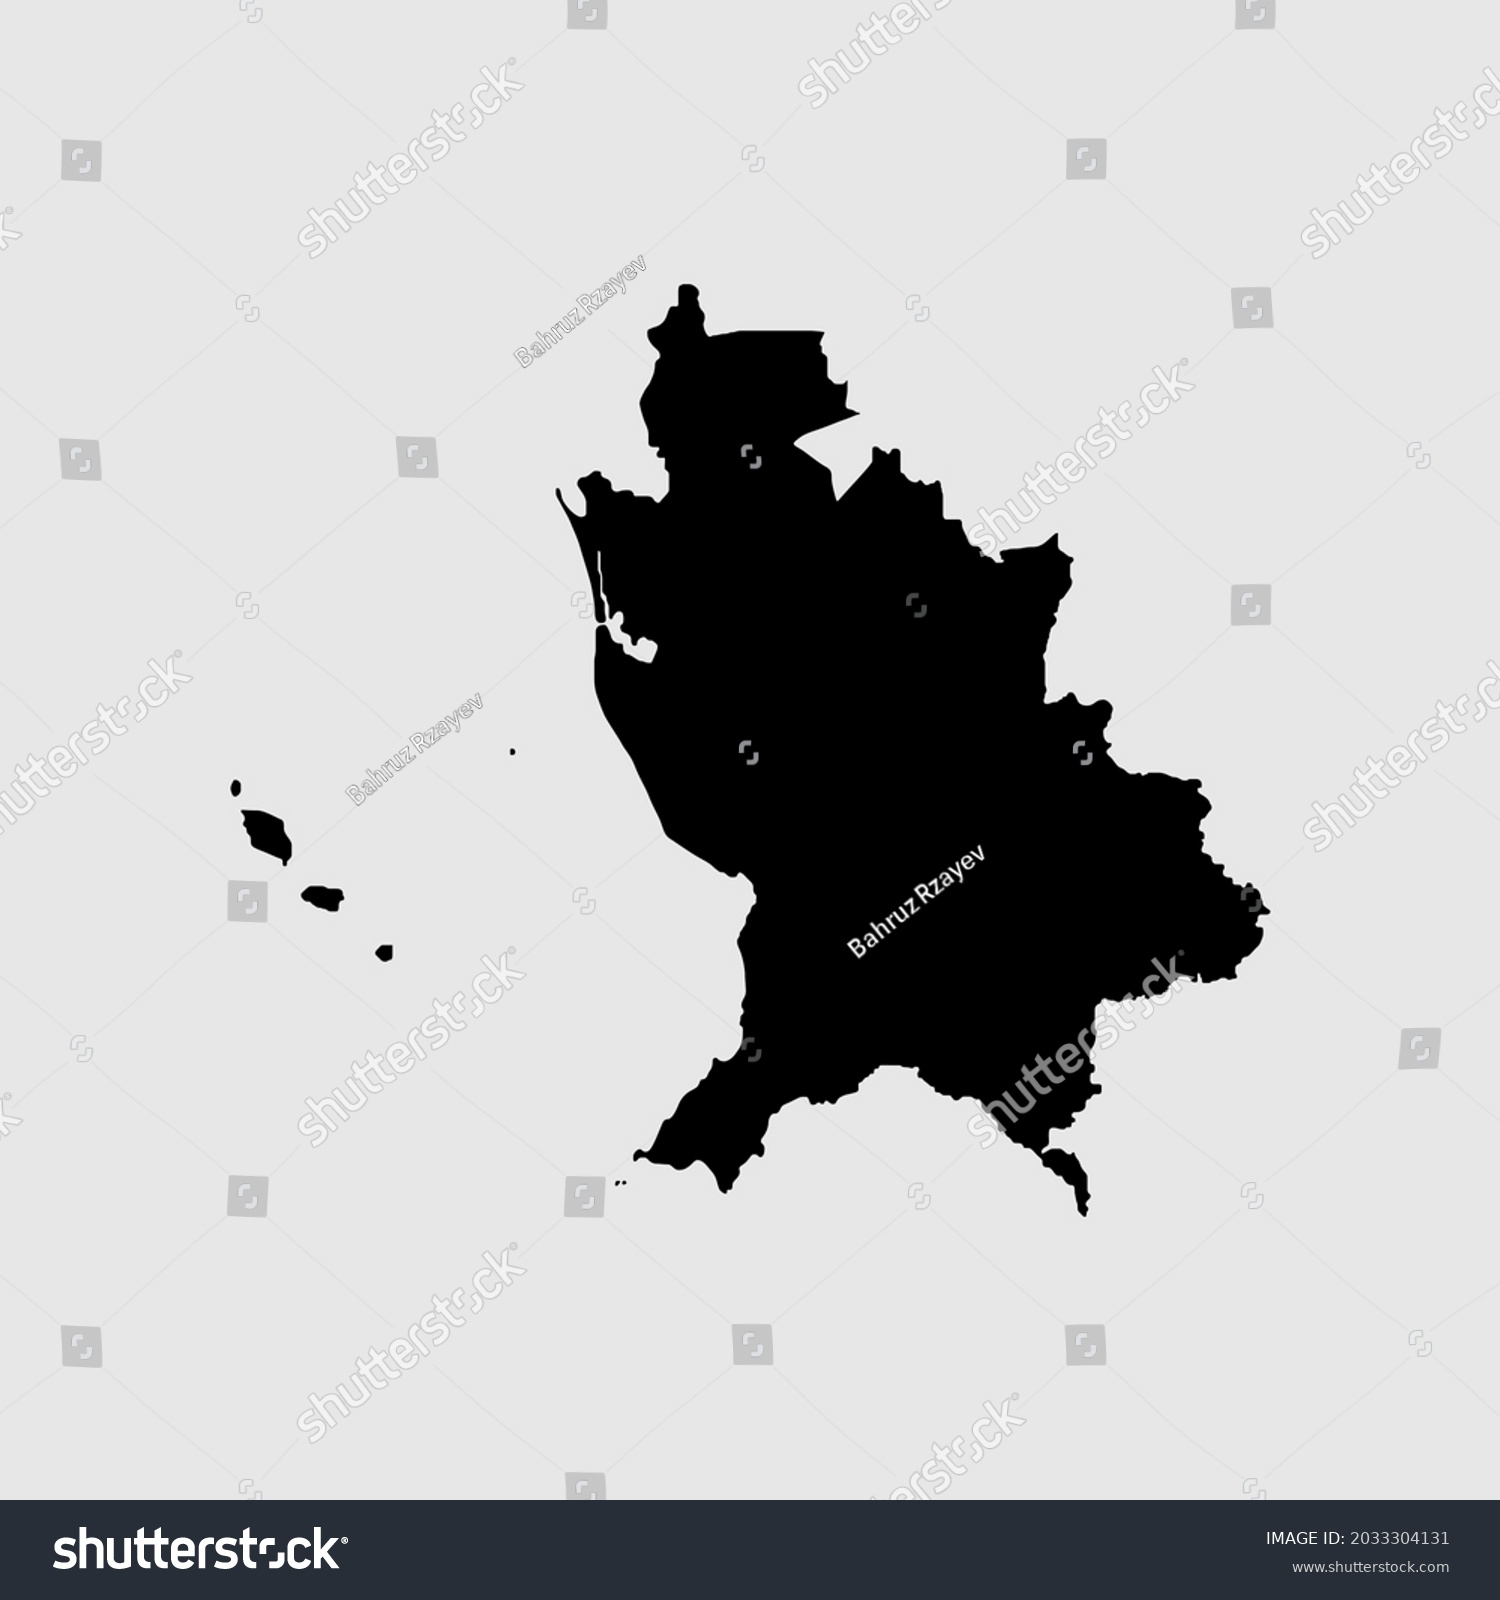 Map Nayarit Mexico Outline Silhouette Vector Stock Vector Royalty Free 2033304131 Shutterstock 6071